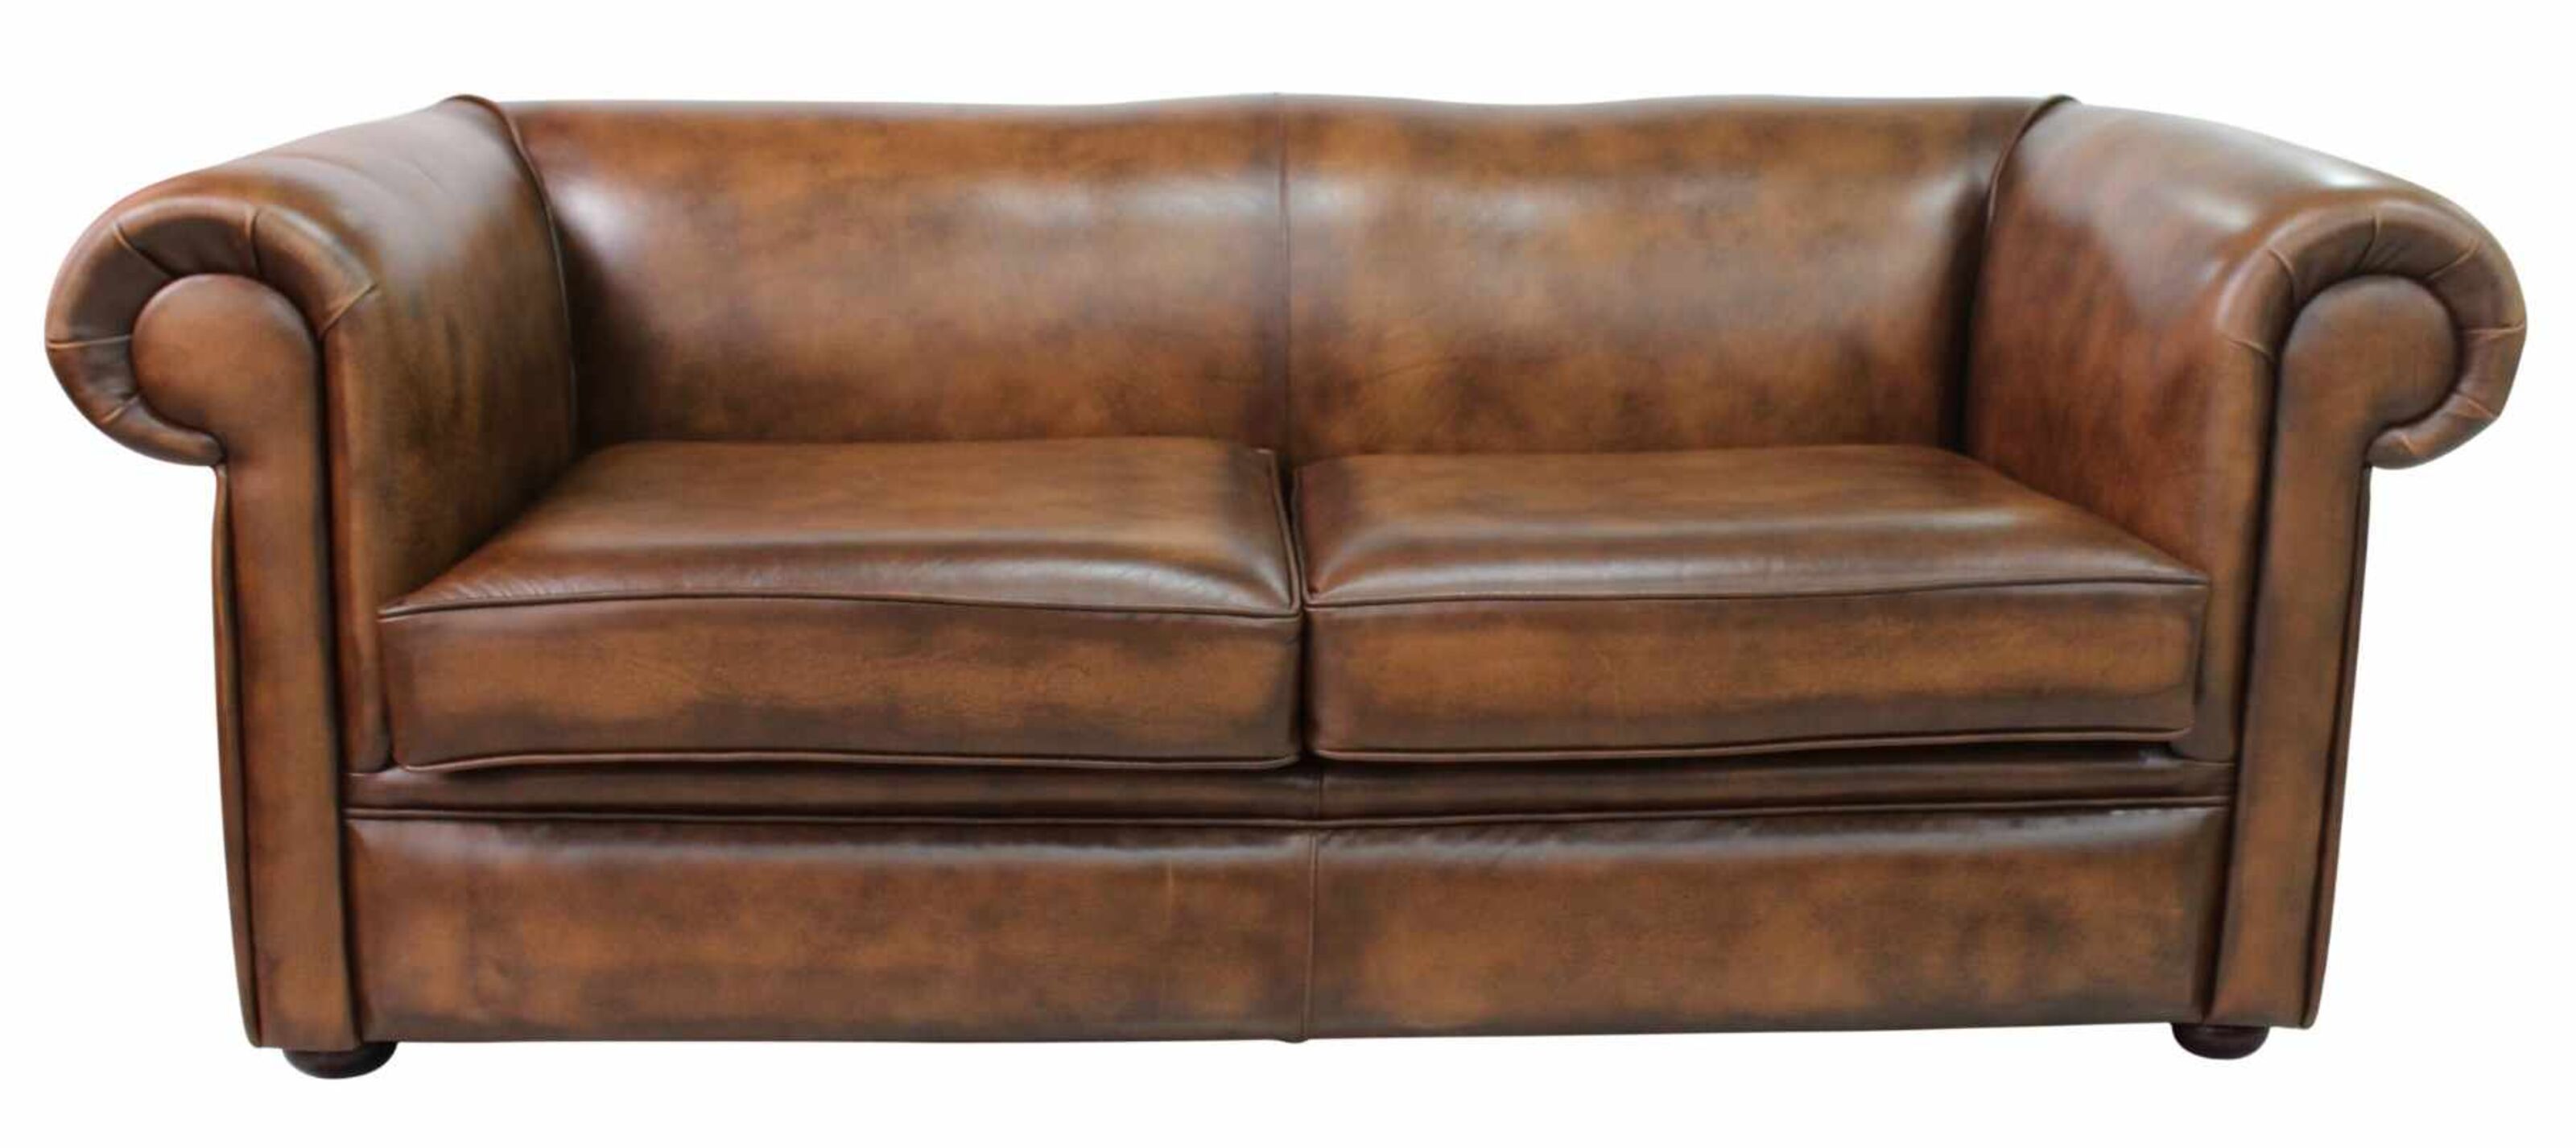 Alfresco Elegance Choosing a Chesterfield Sofa for Outdoor Living Spaces  %Post Title